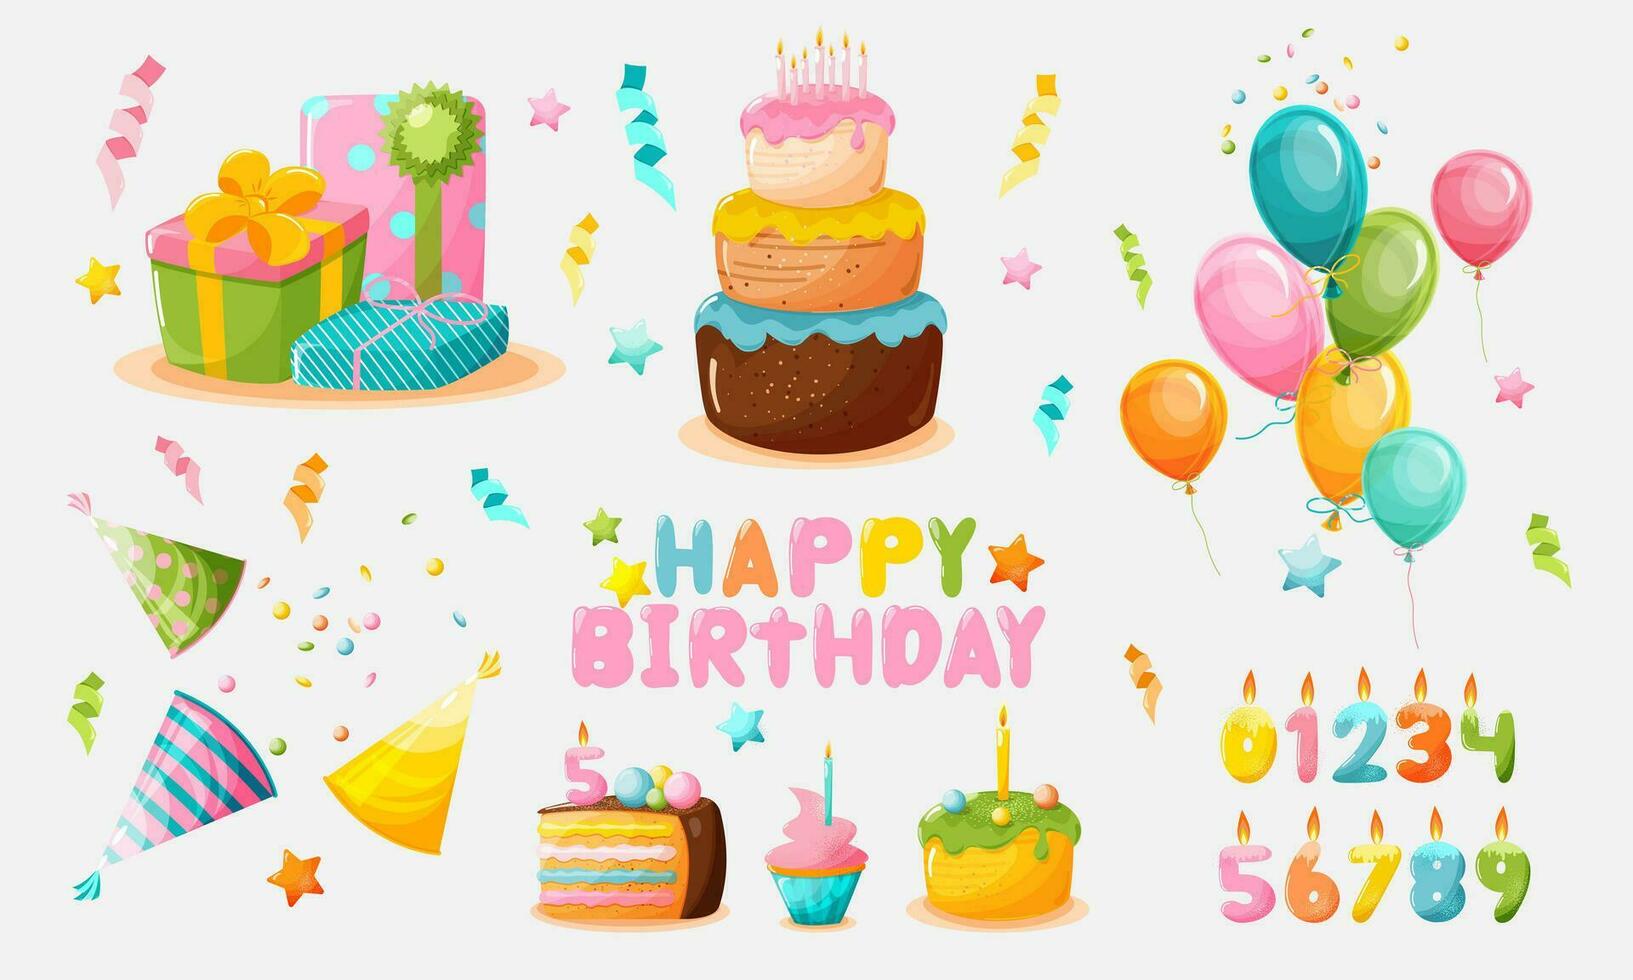 Set of elements for birthday design. Cake, happy birthday text, figures of candles with numbers, gifts, birthday hats, balloons, a piece of cake with candles, cupcake, serpentine, confetti, stars. vector